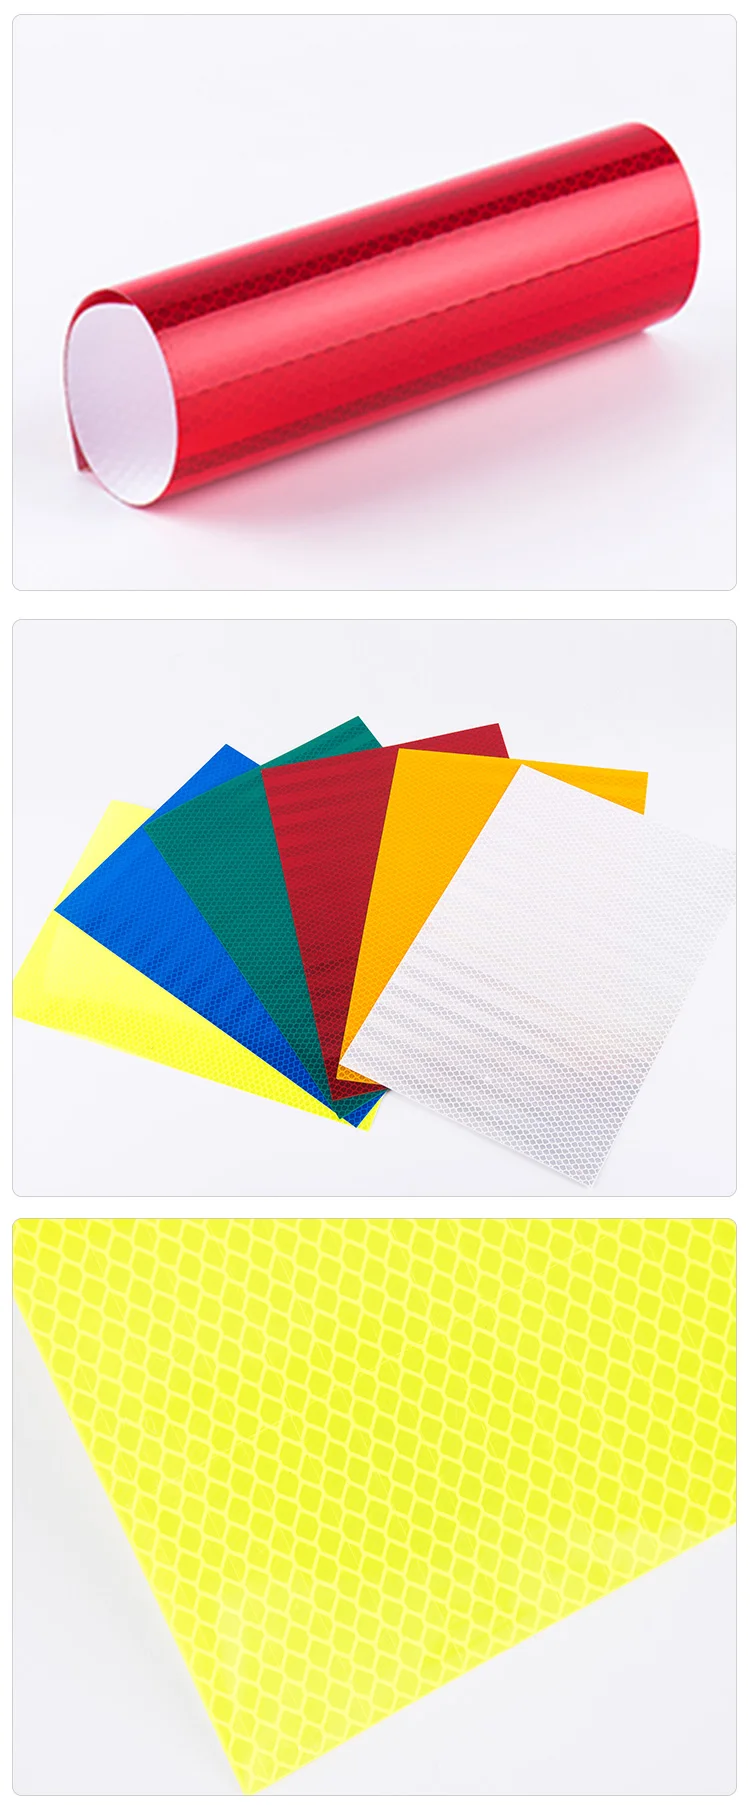 High Intensity Prismatic Reflective Material Warning Tape Reflective Film For Safety Road Signs